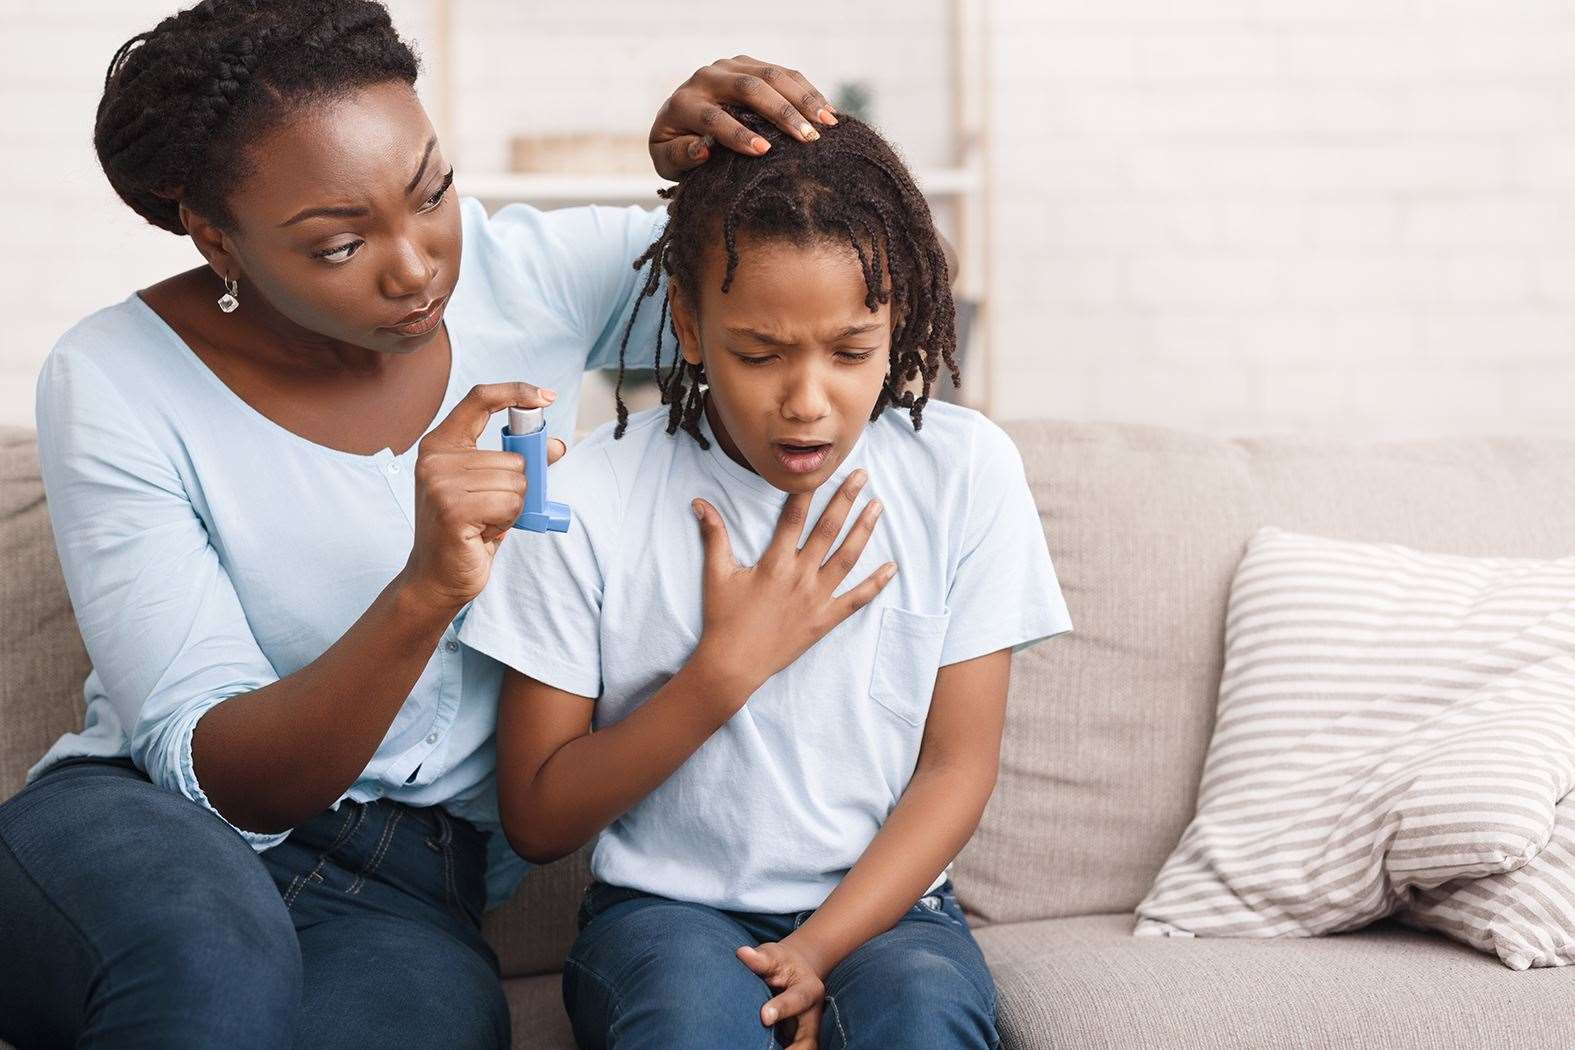 Parents are urged to know the signs to preven an asthma attack.